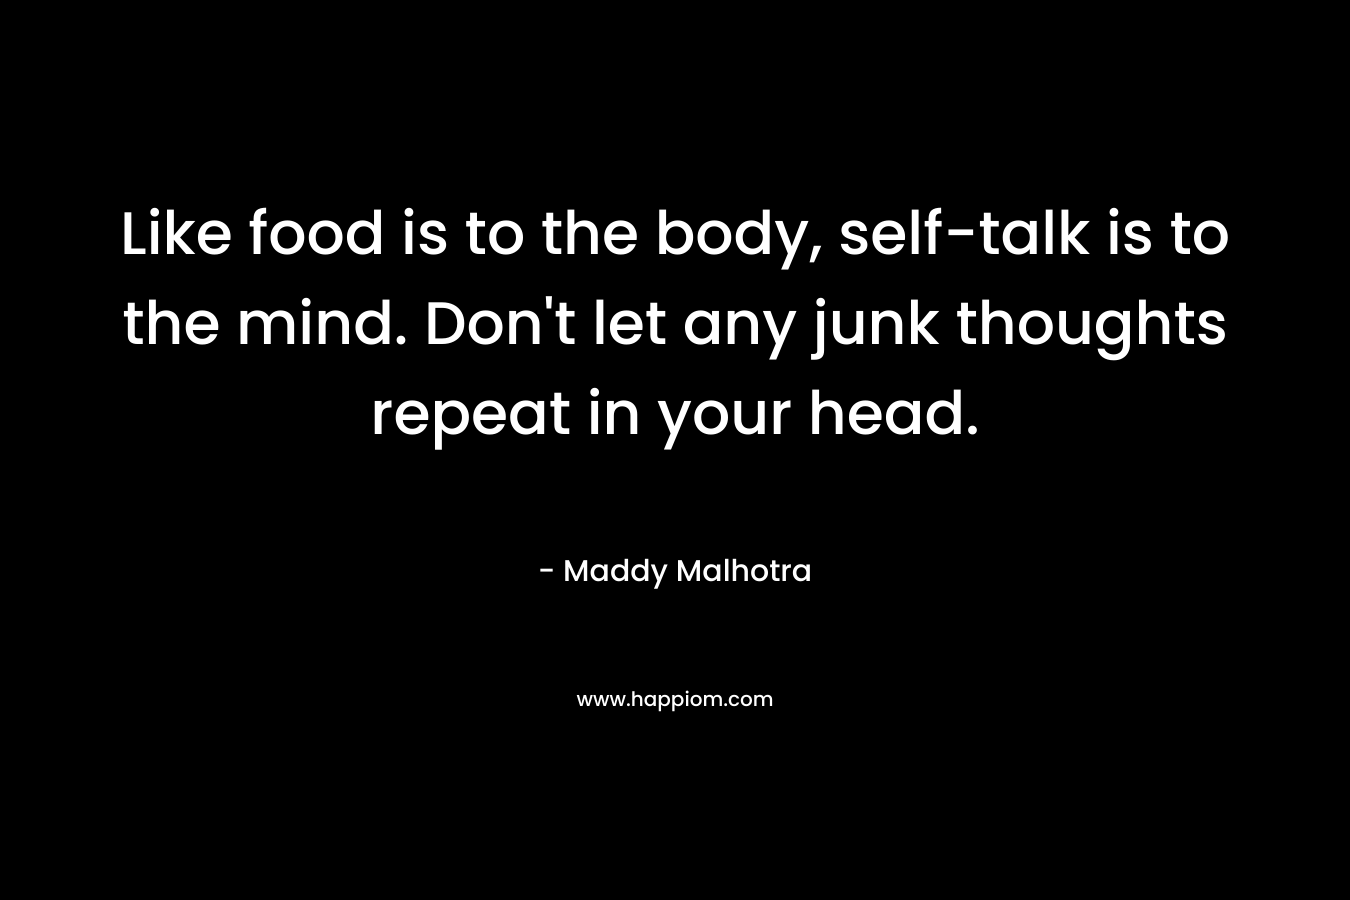 Like food is to the body, self-talk is to the mind. Don’t let any junk thoughts repeat in your head. – Maddy Malhotra